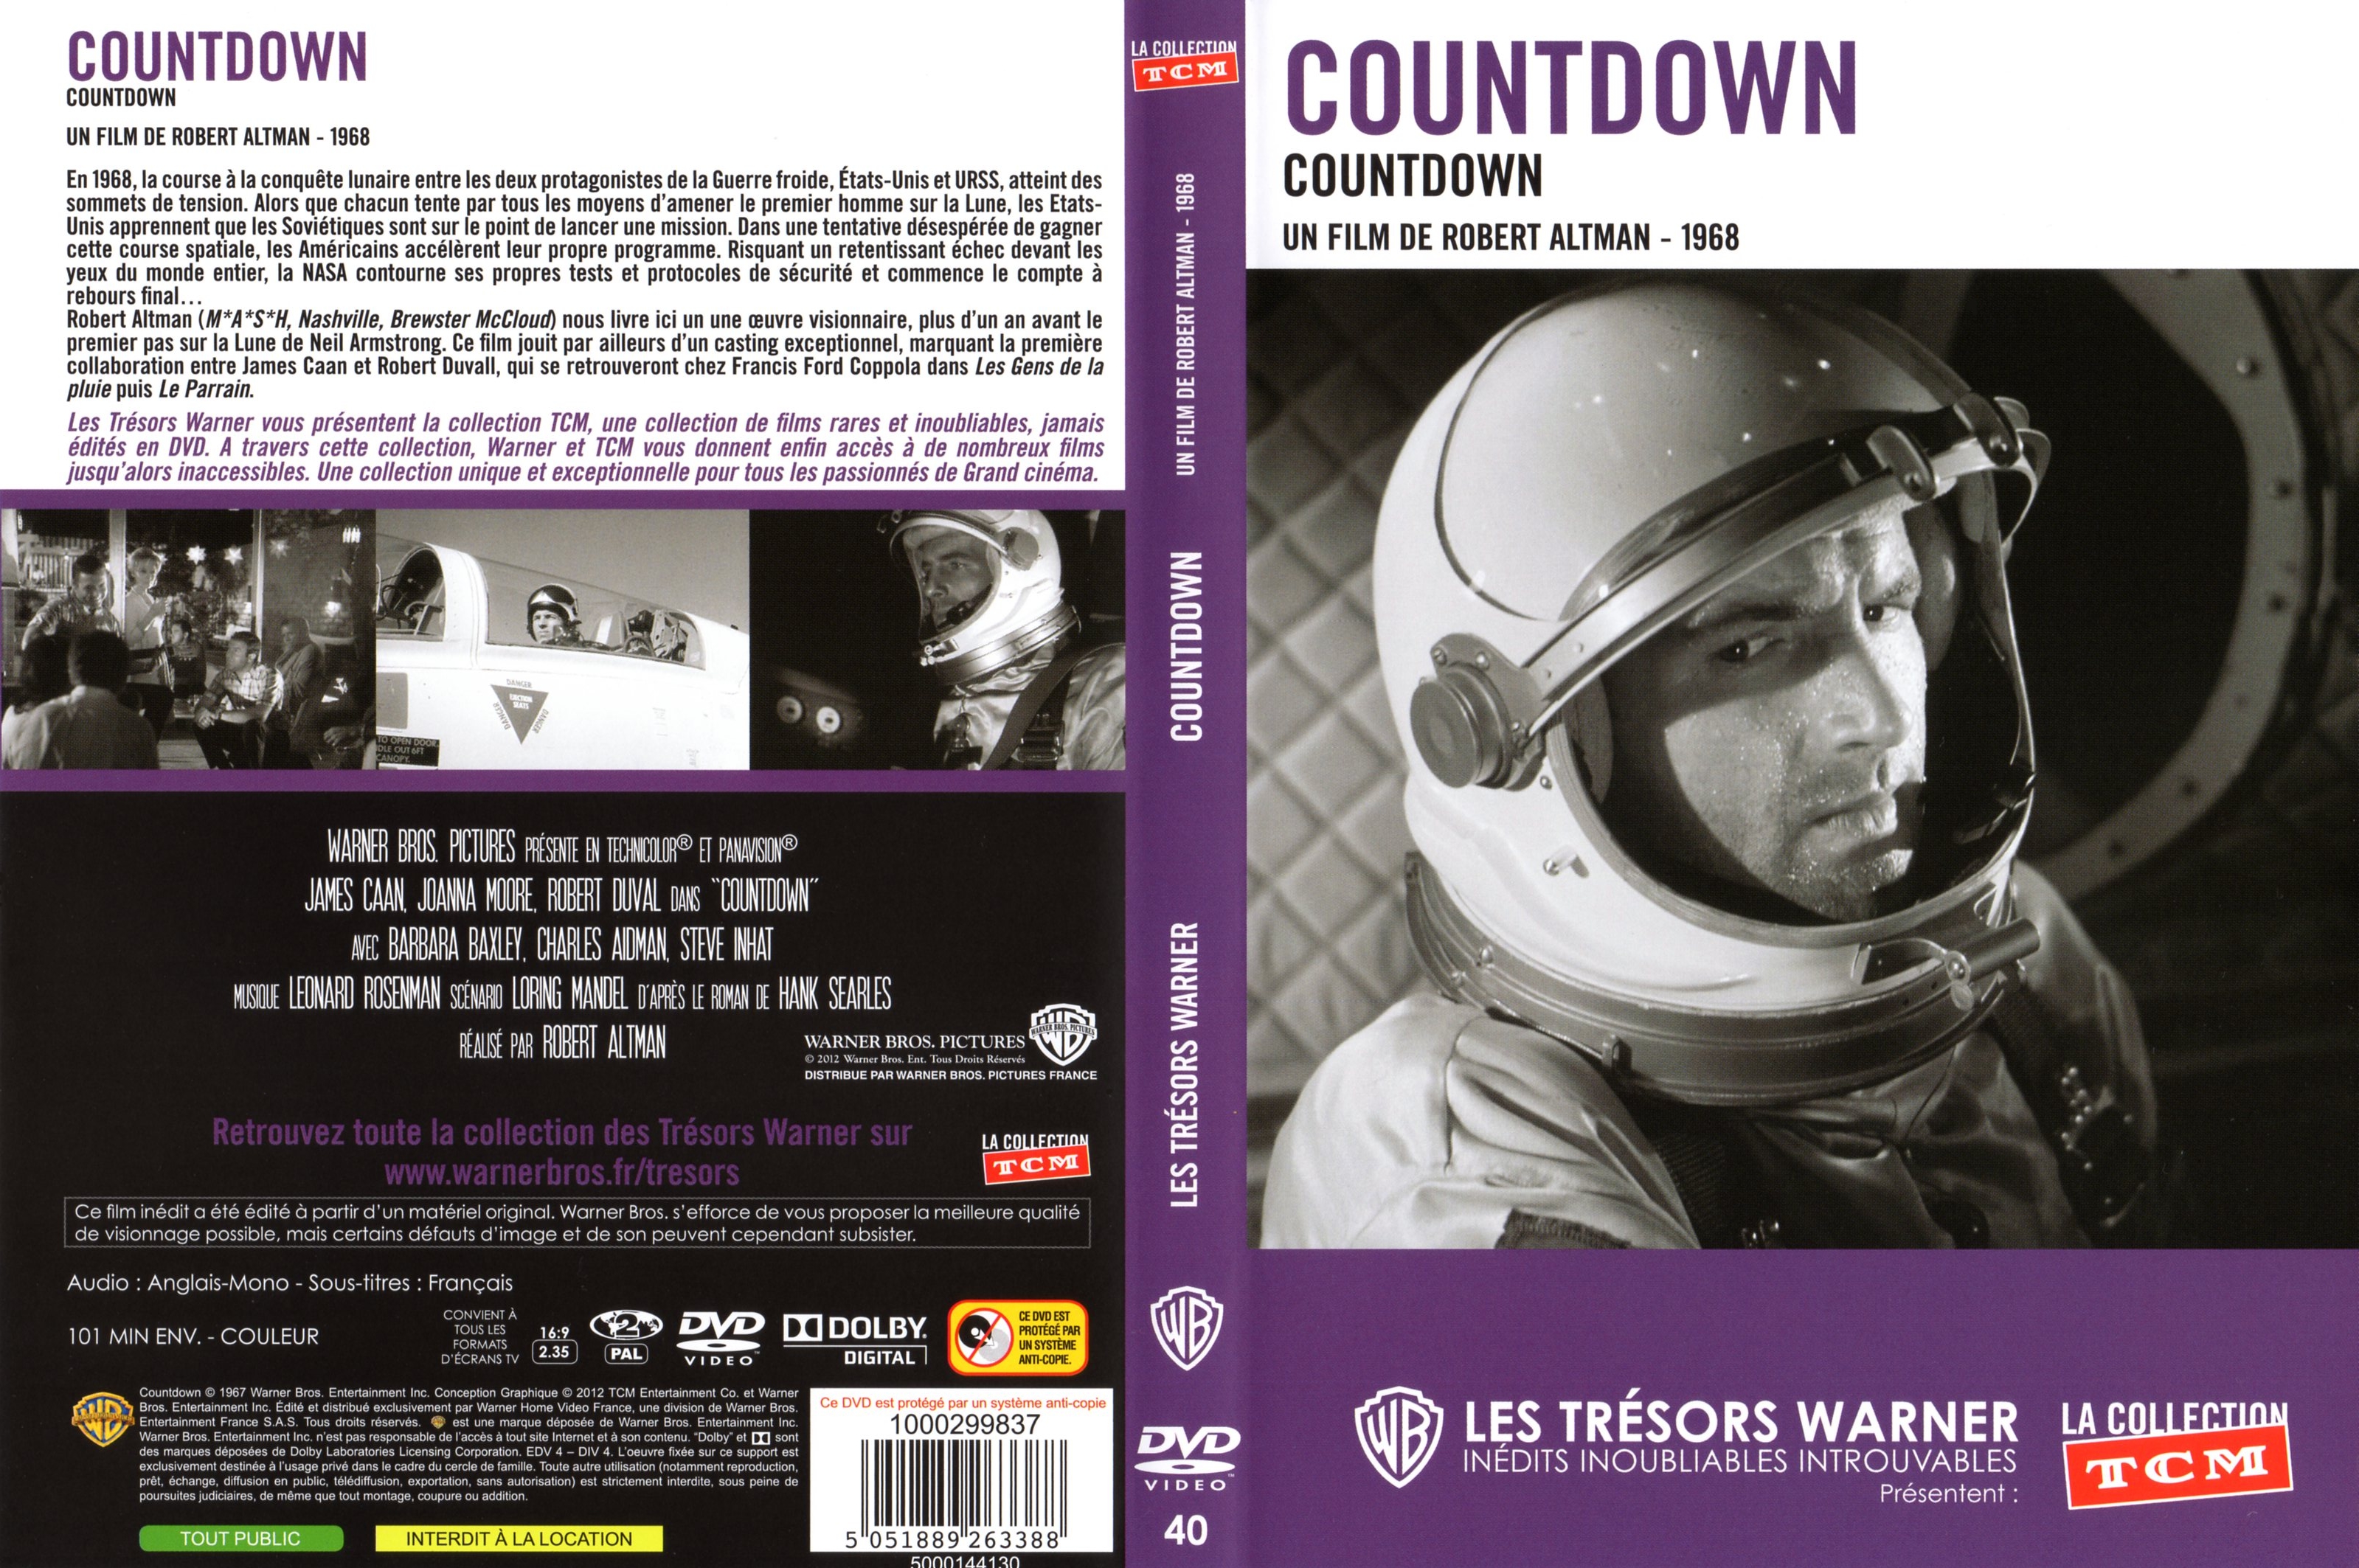 Jaquette DVD Countdown (1967)